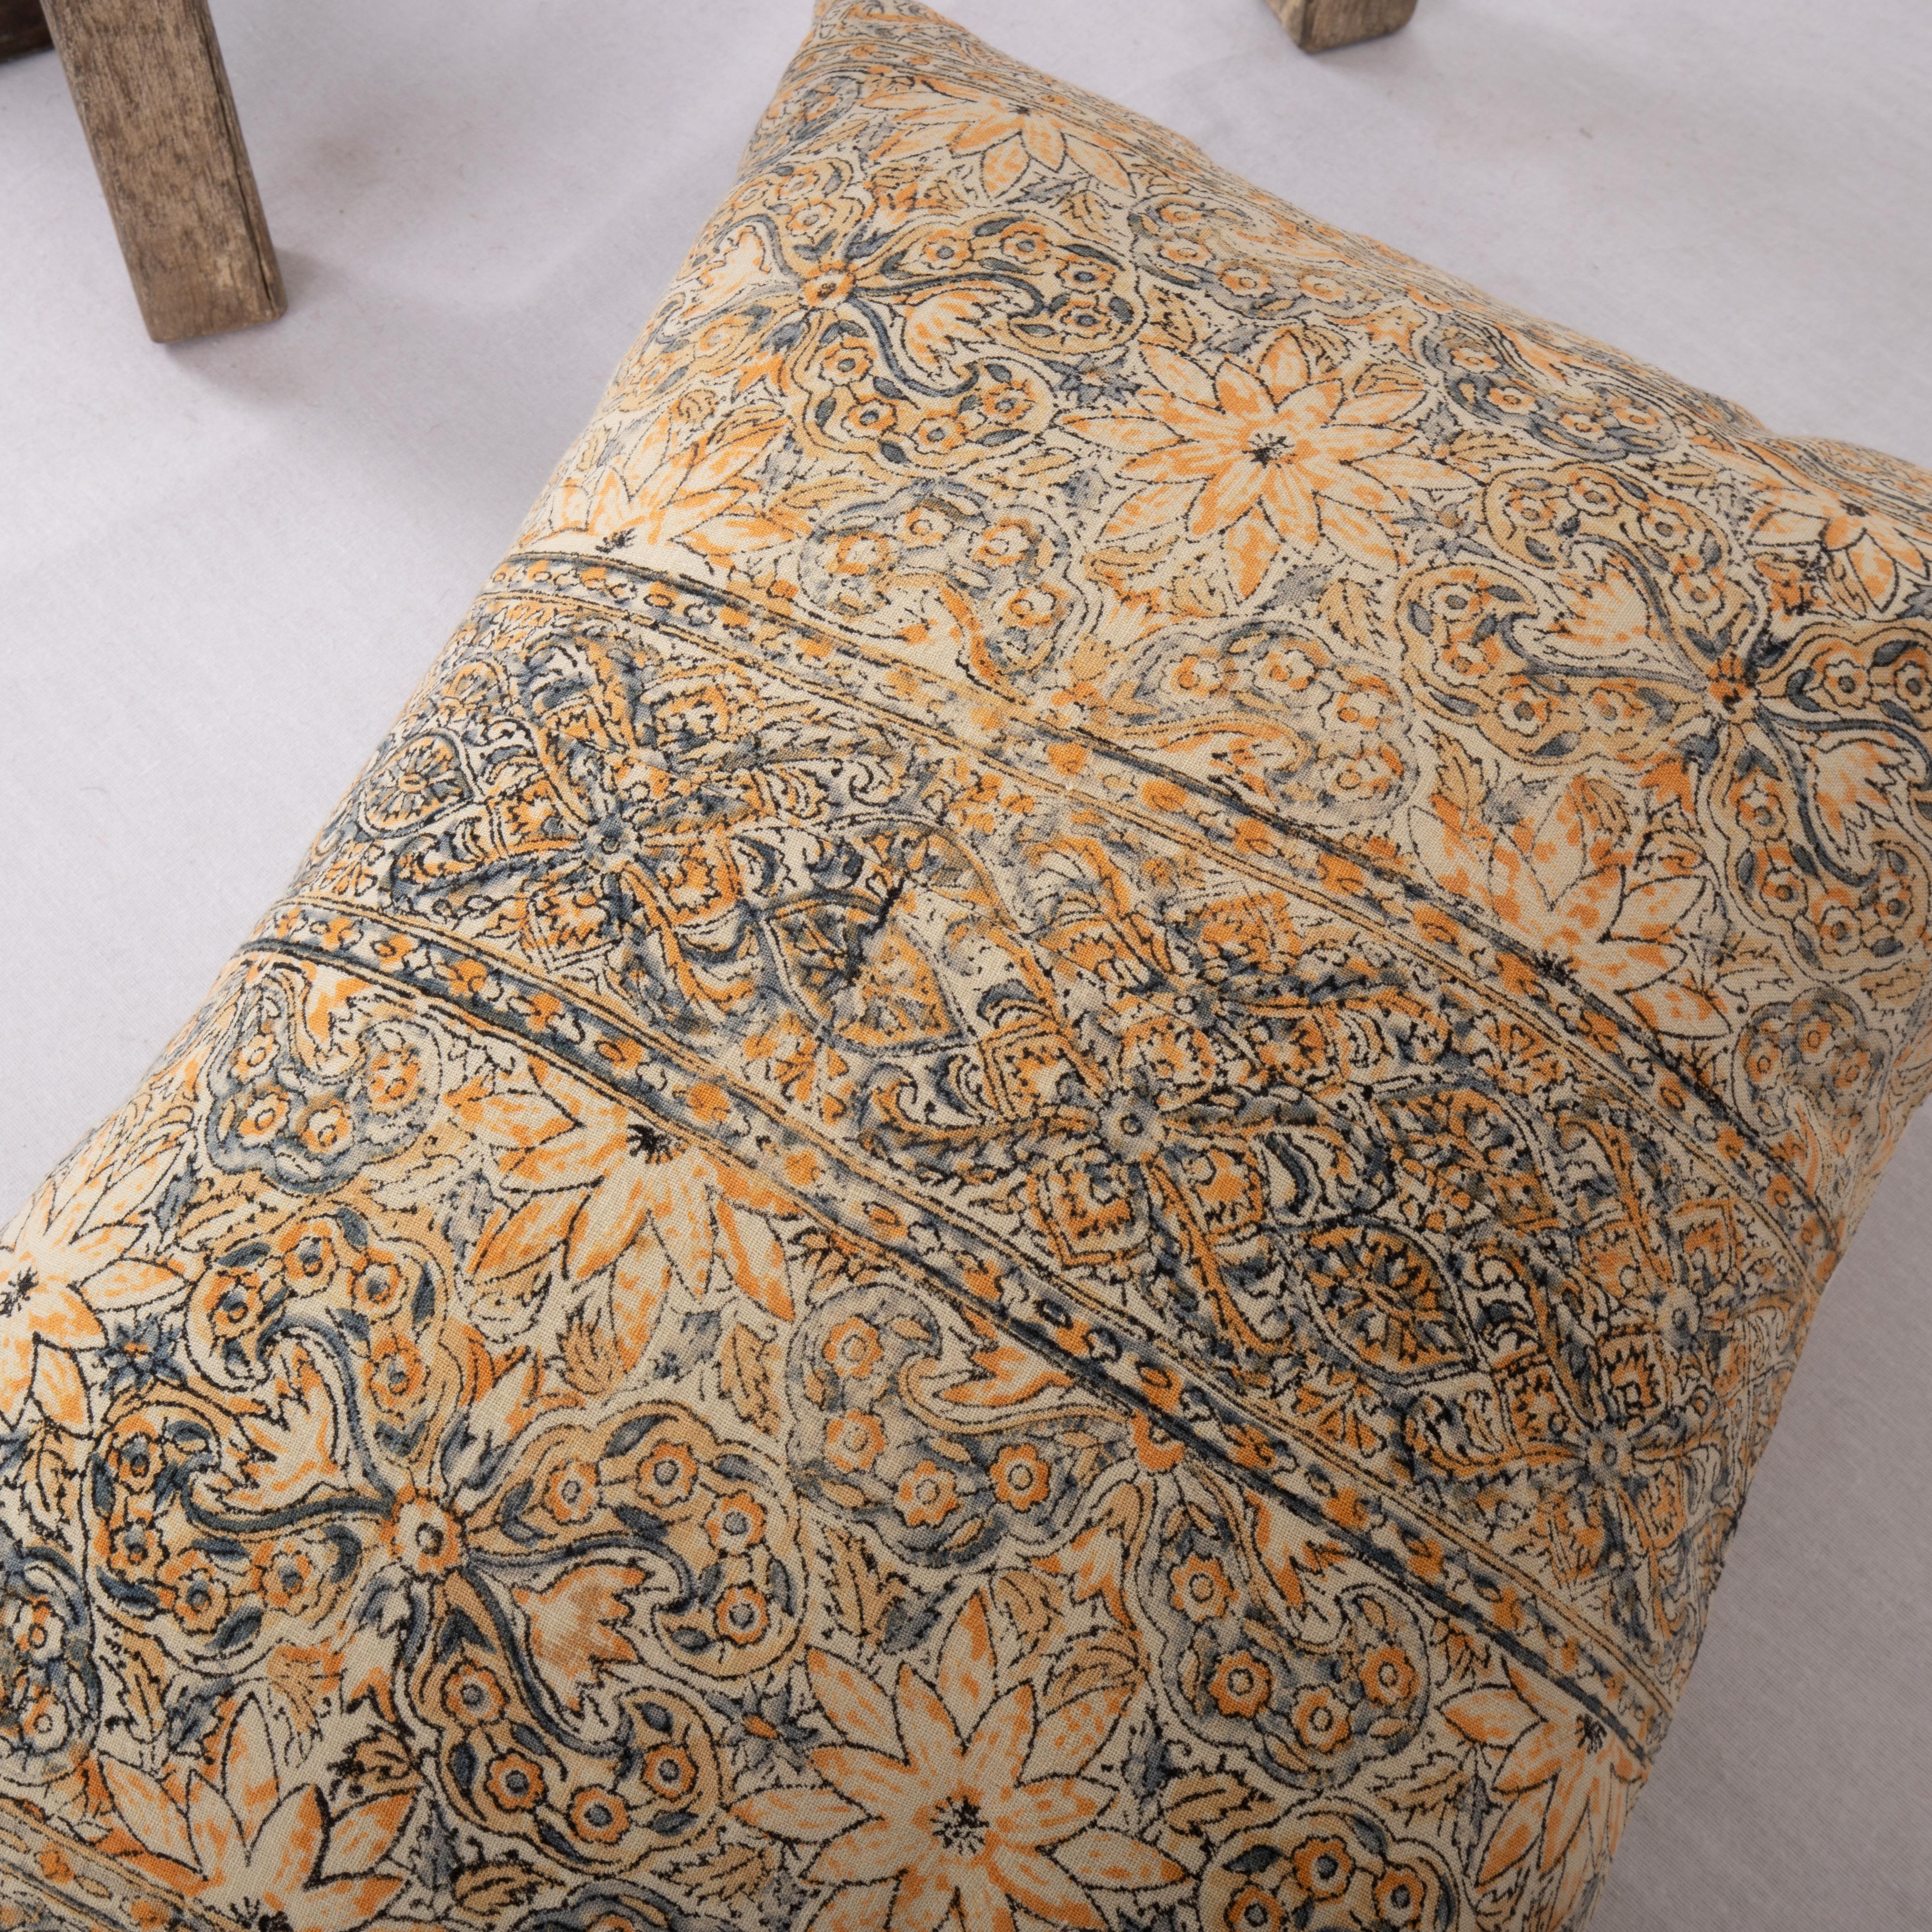 Kalamkari Pillow Cover Made from a Vintage Indian Block Printed Textile For Sale